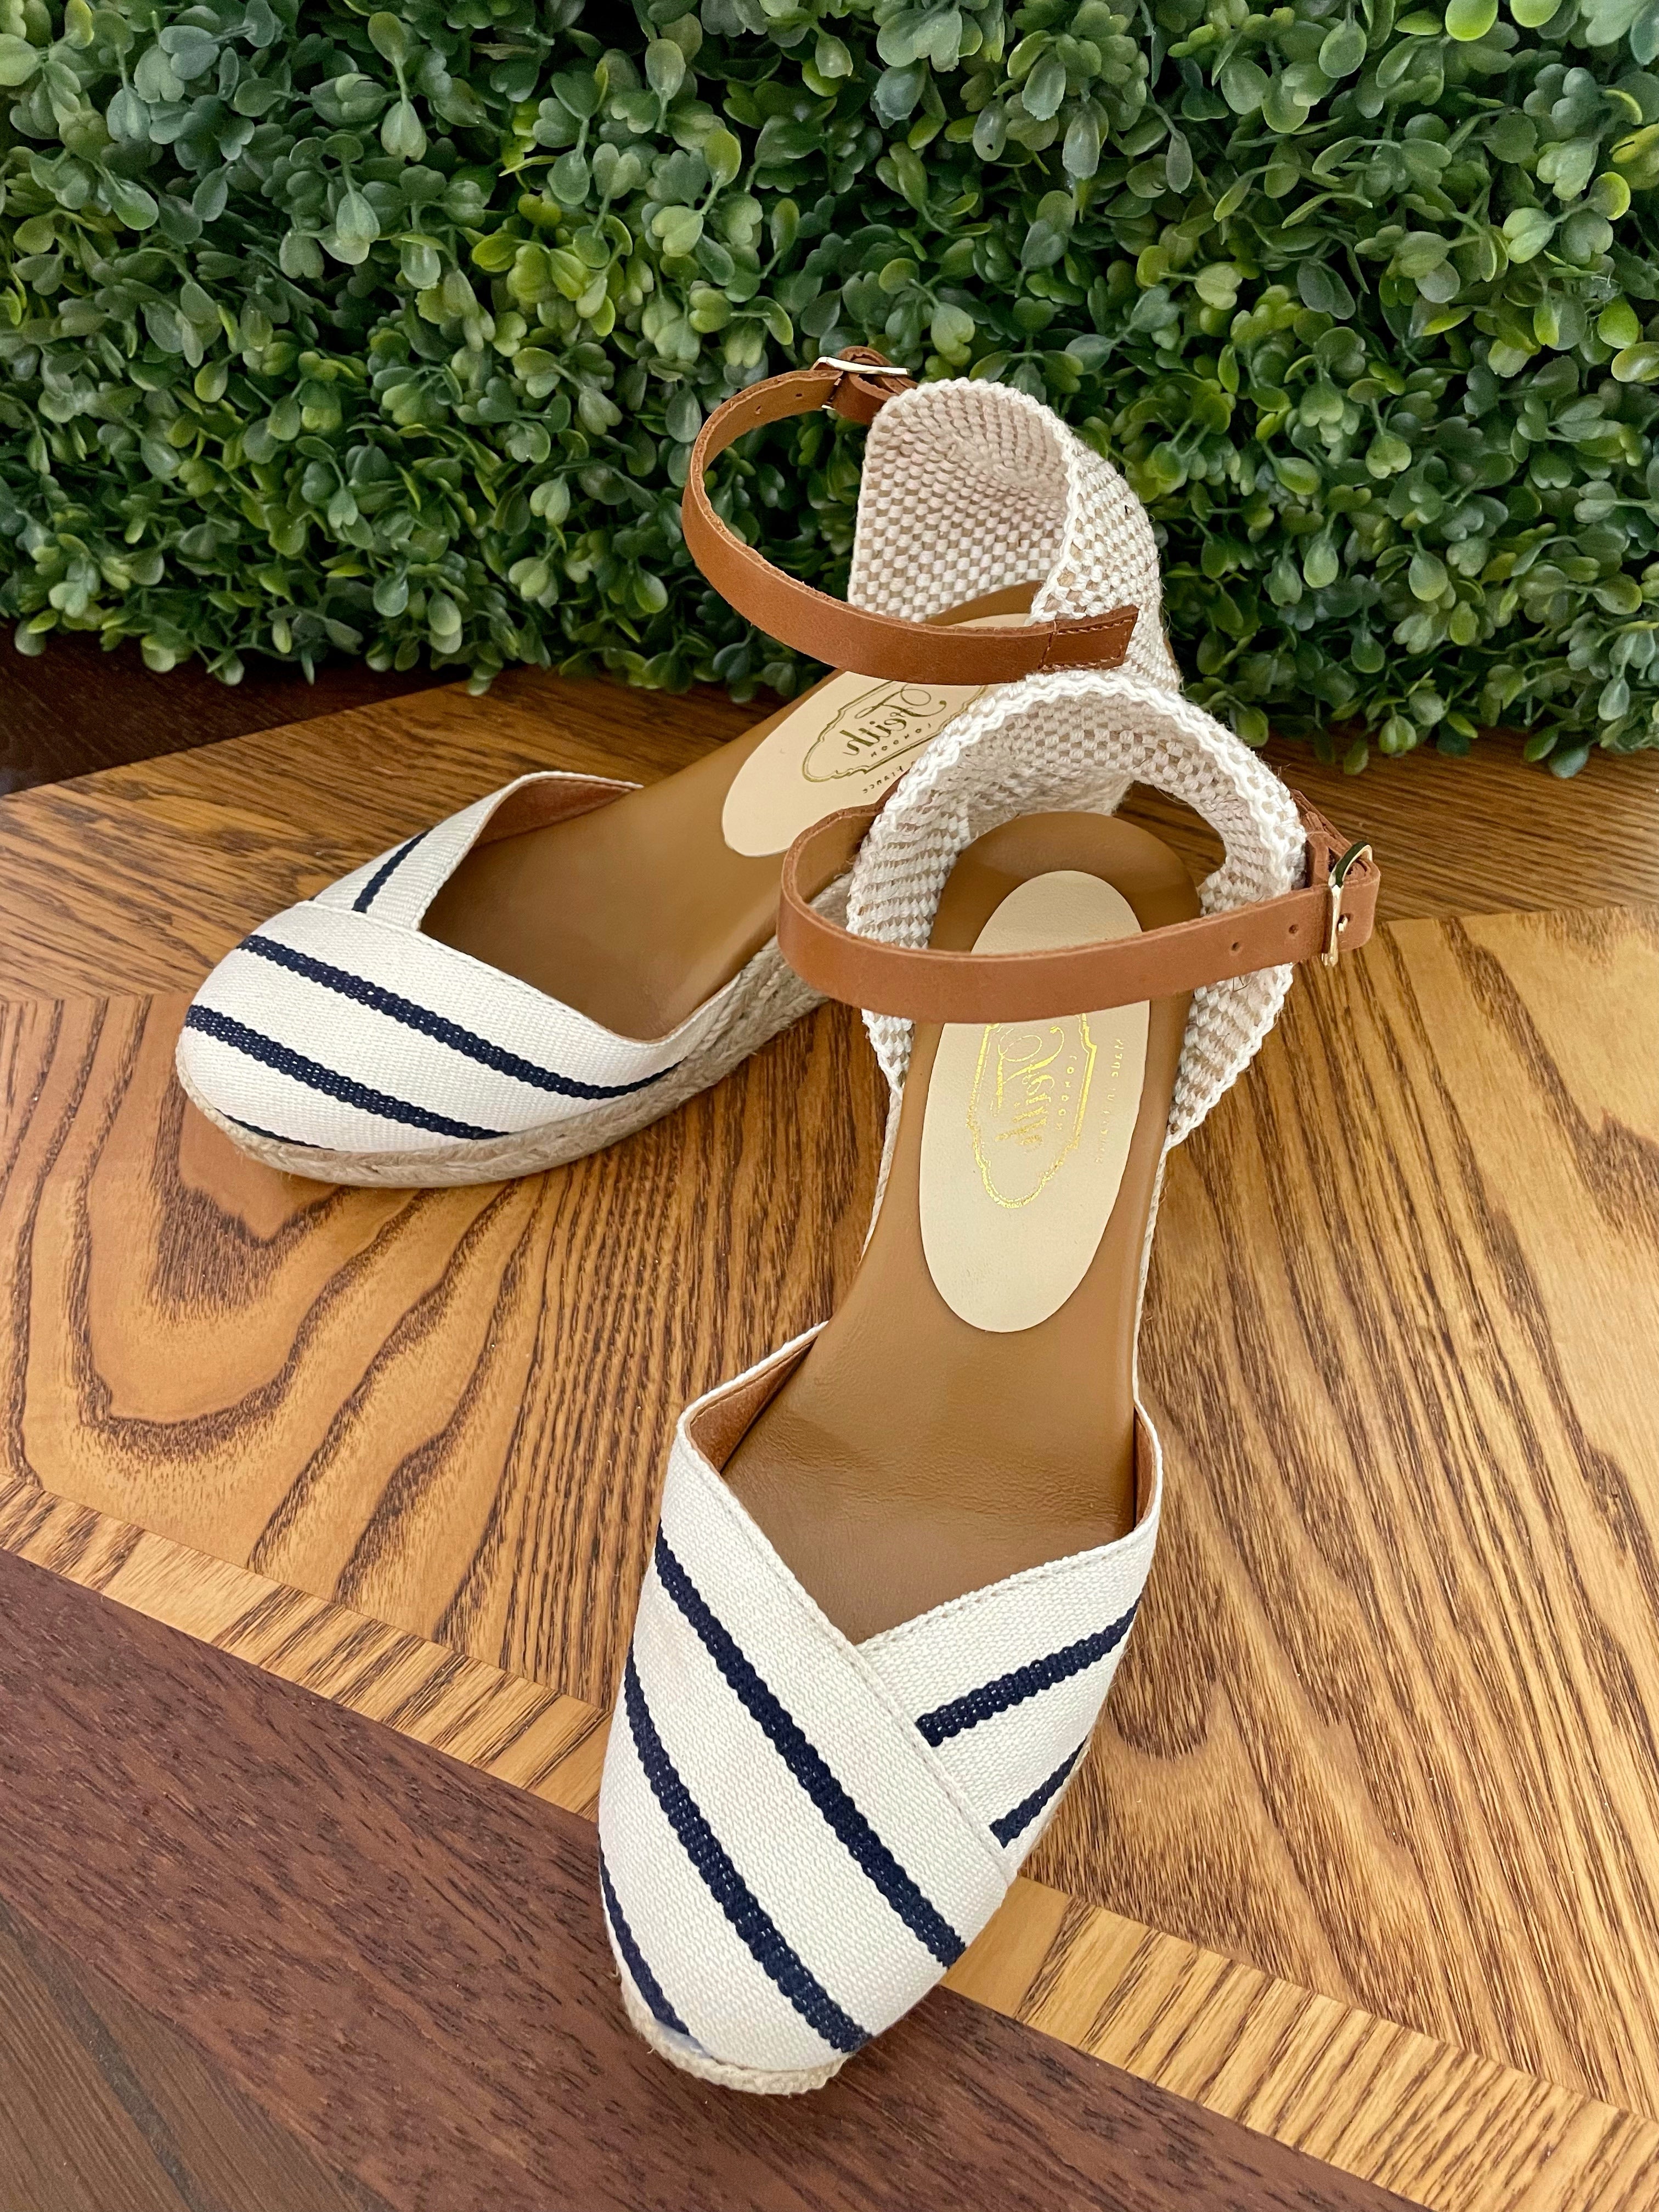 Espadrille Boucle Wedges in Navy Stripes